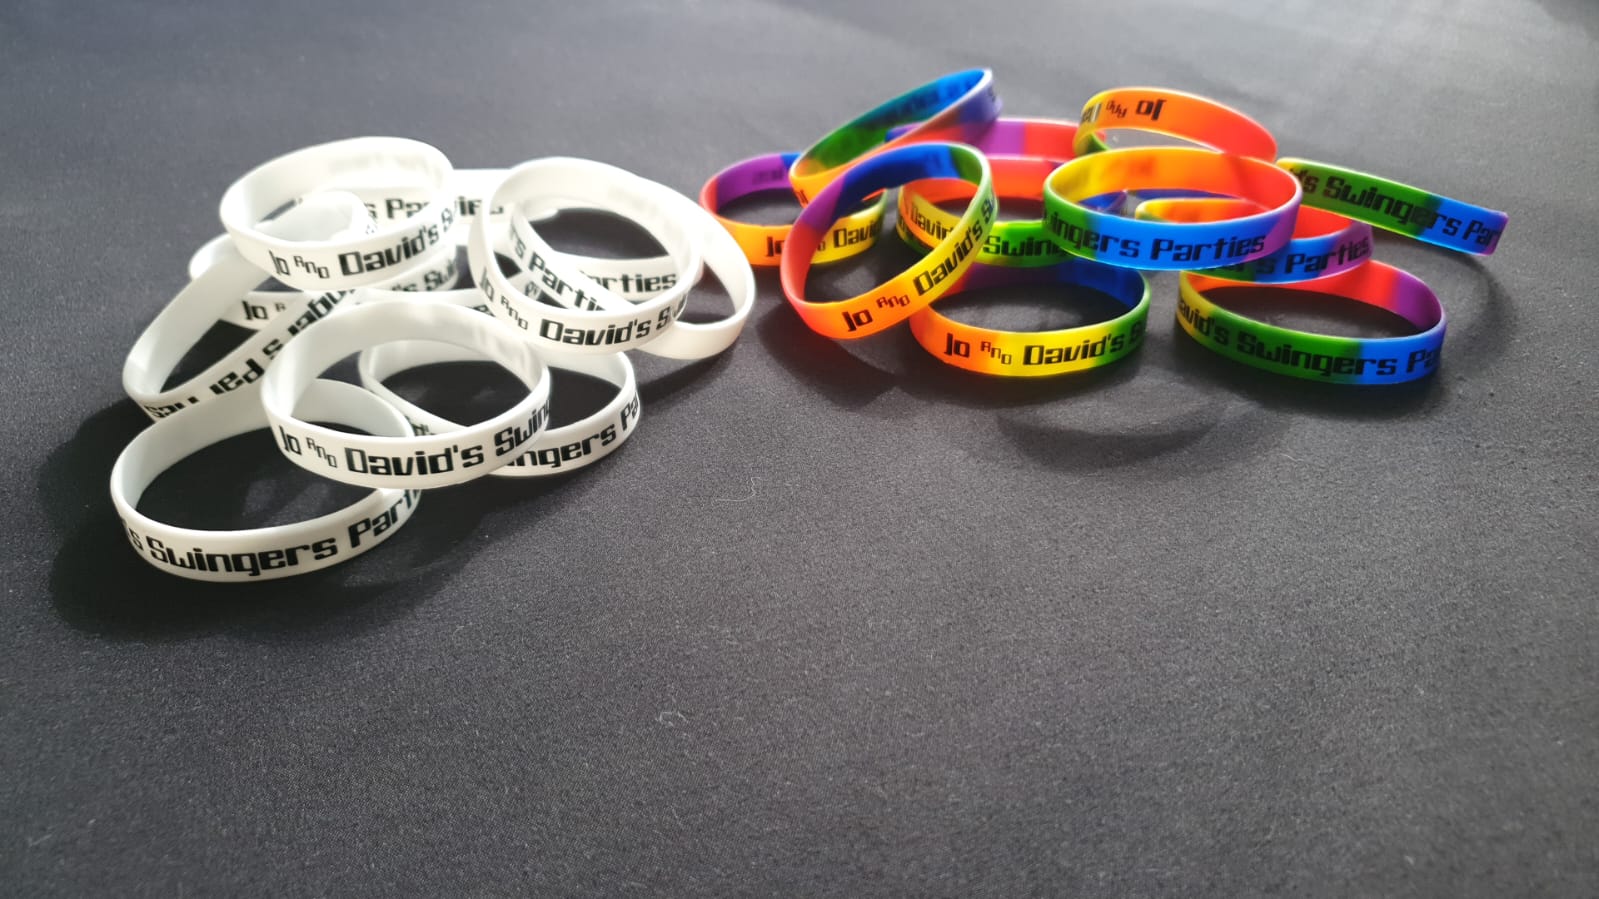 wristbands to identify sexual preferences.